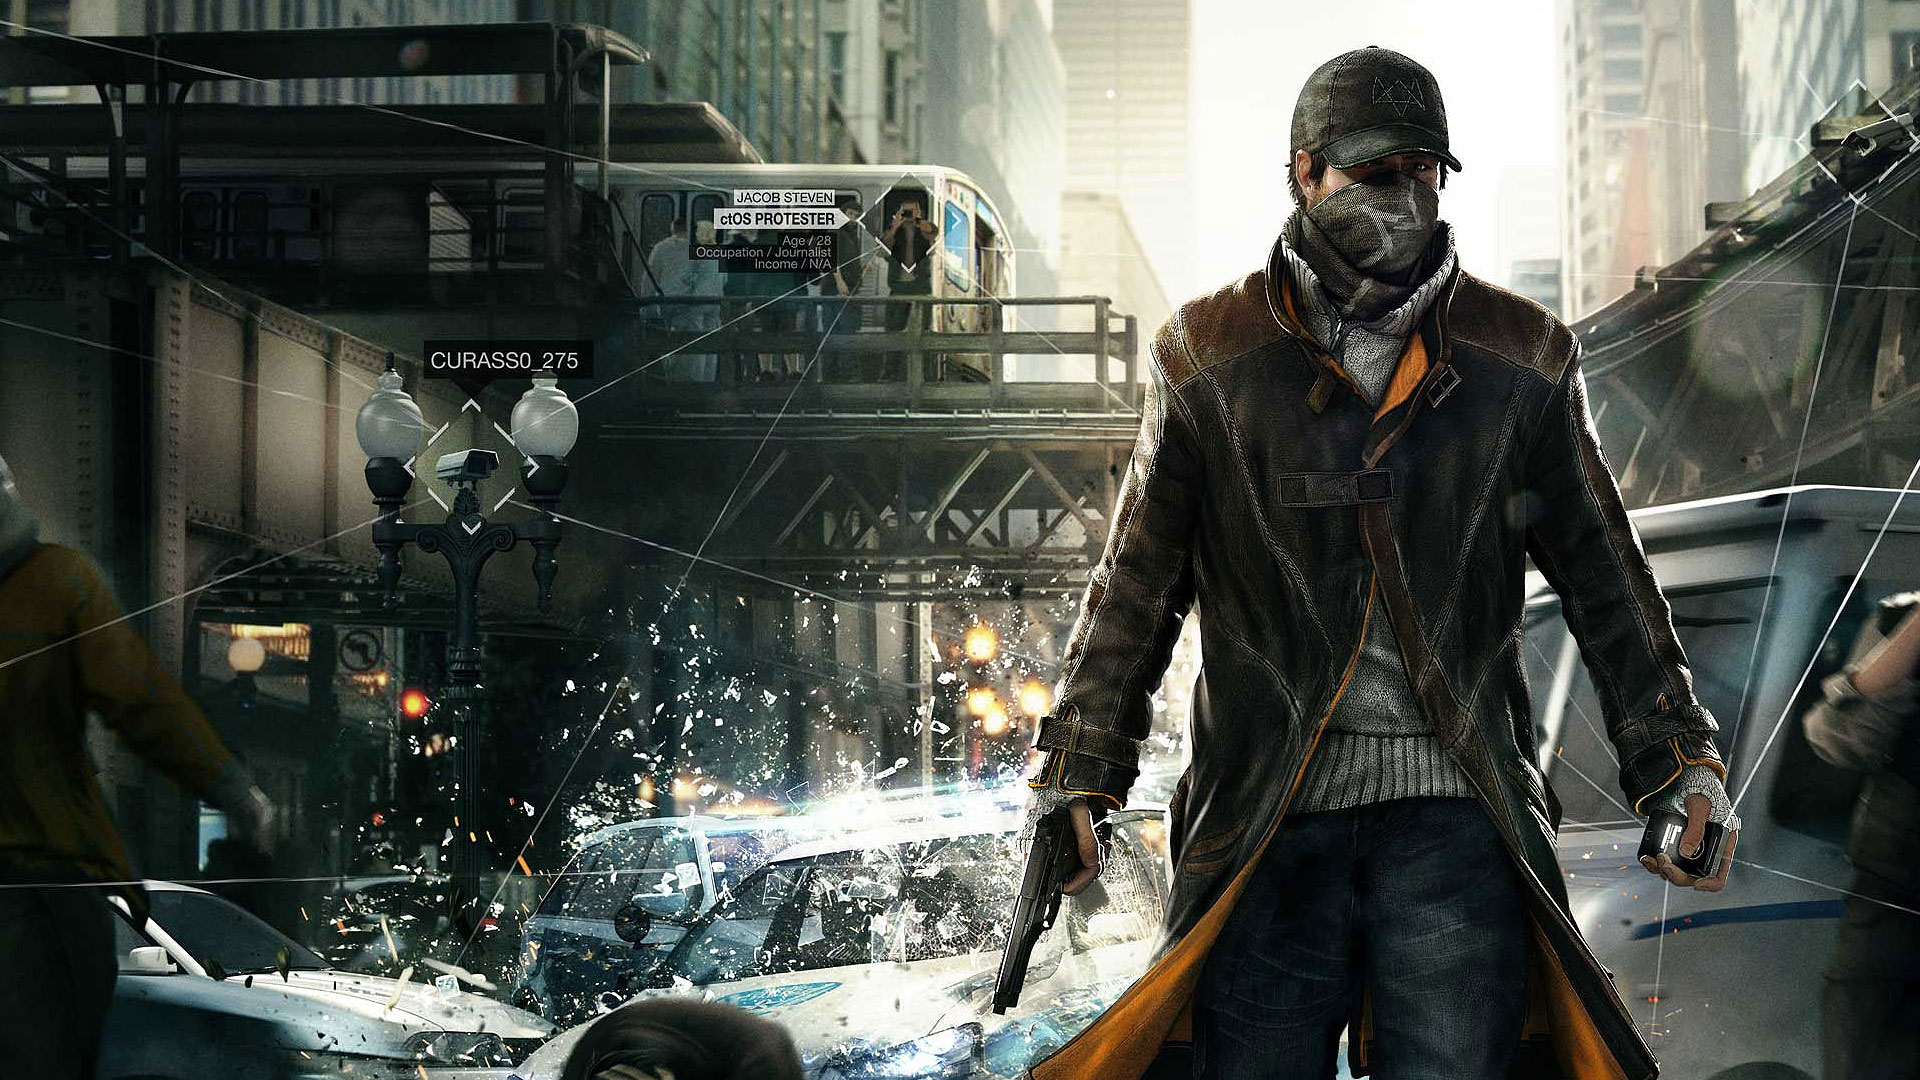 Review: watch dogs (it’s not a hack job)